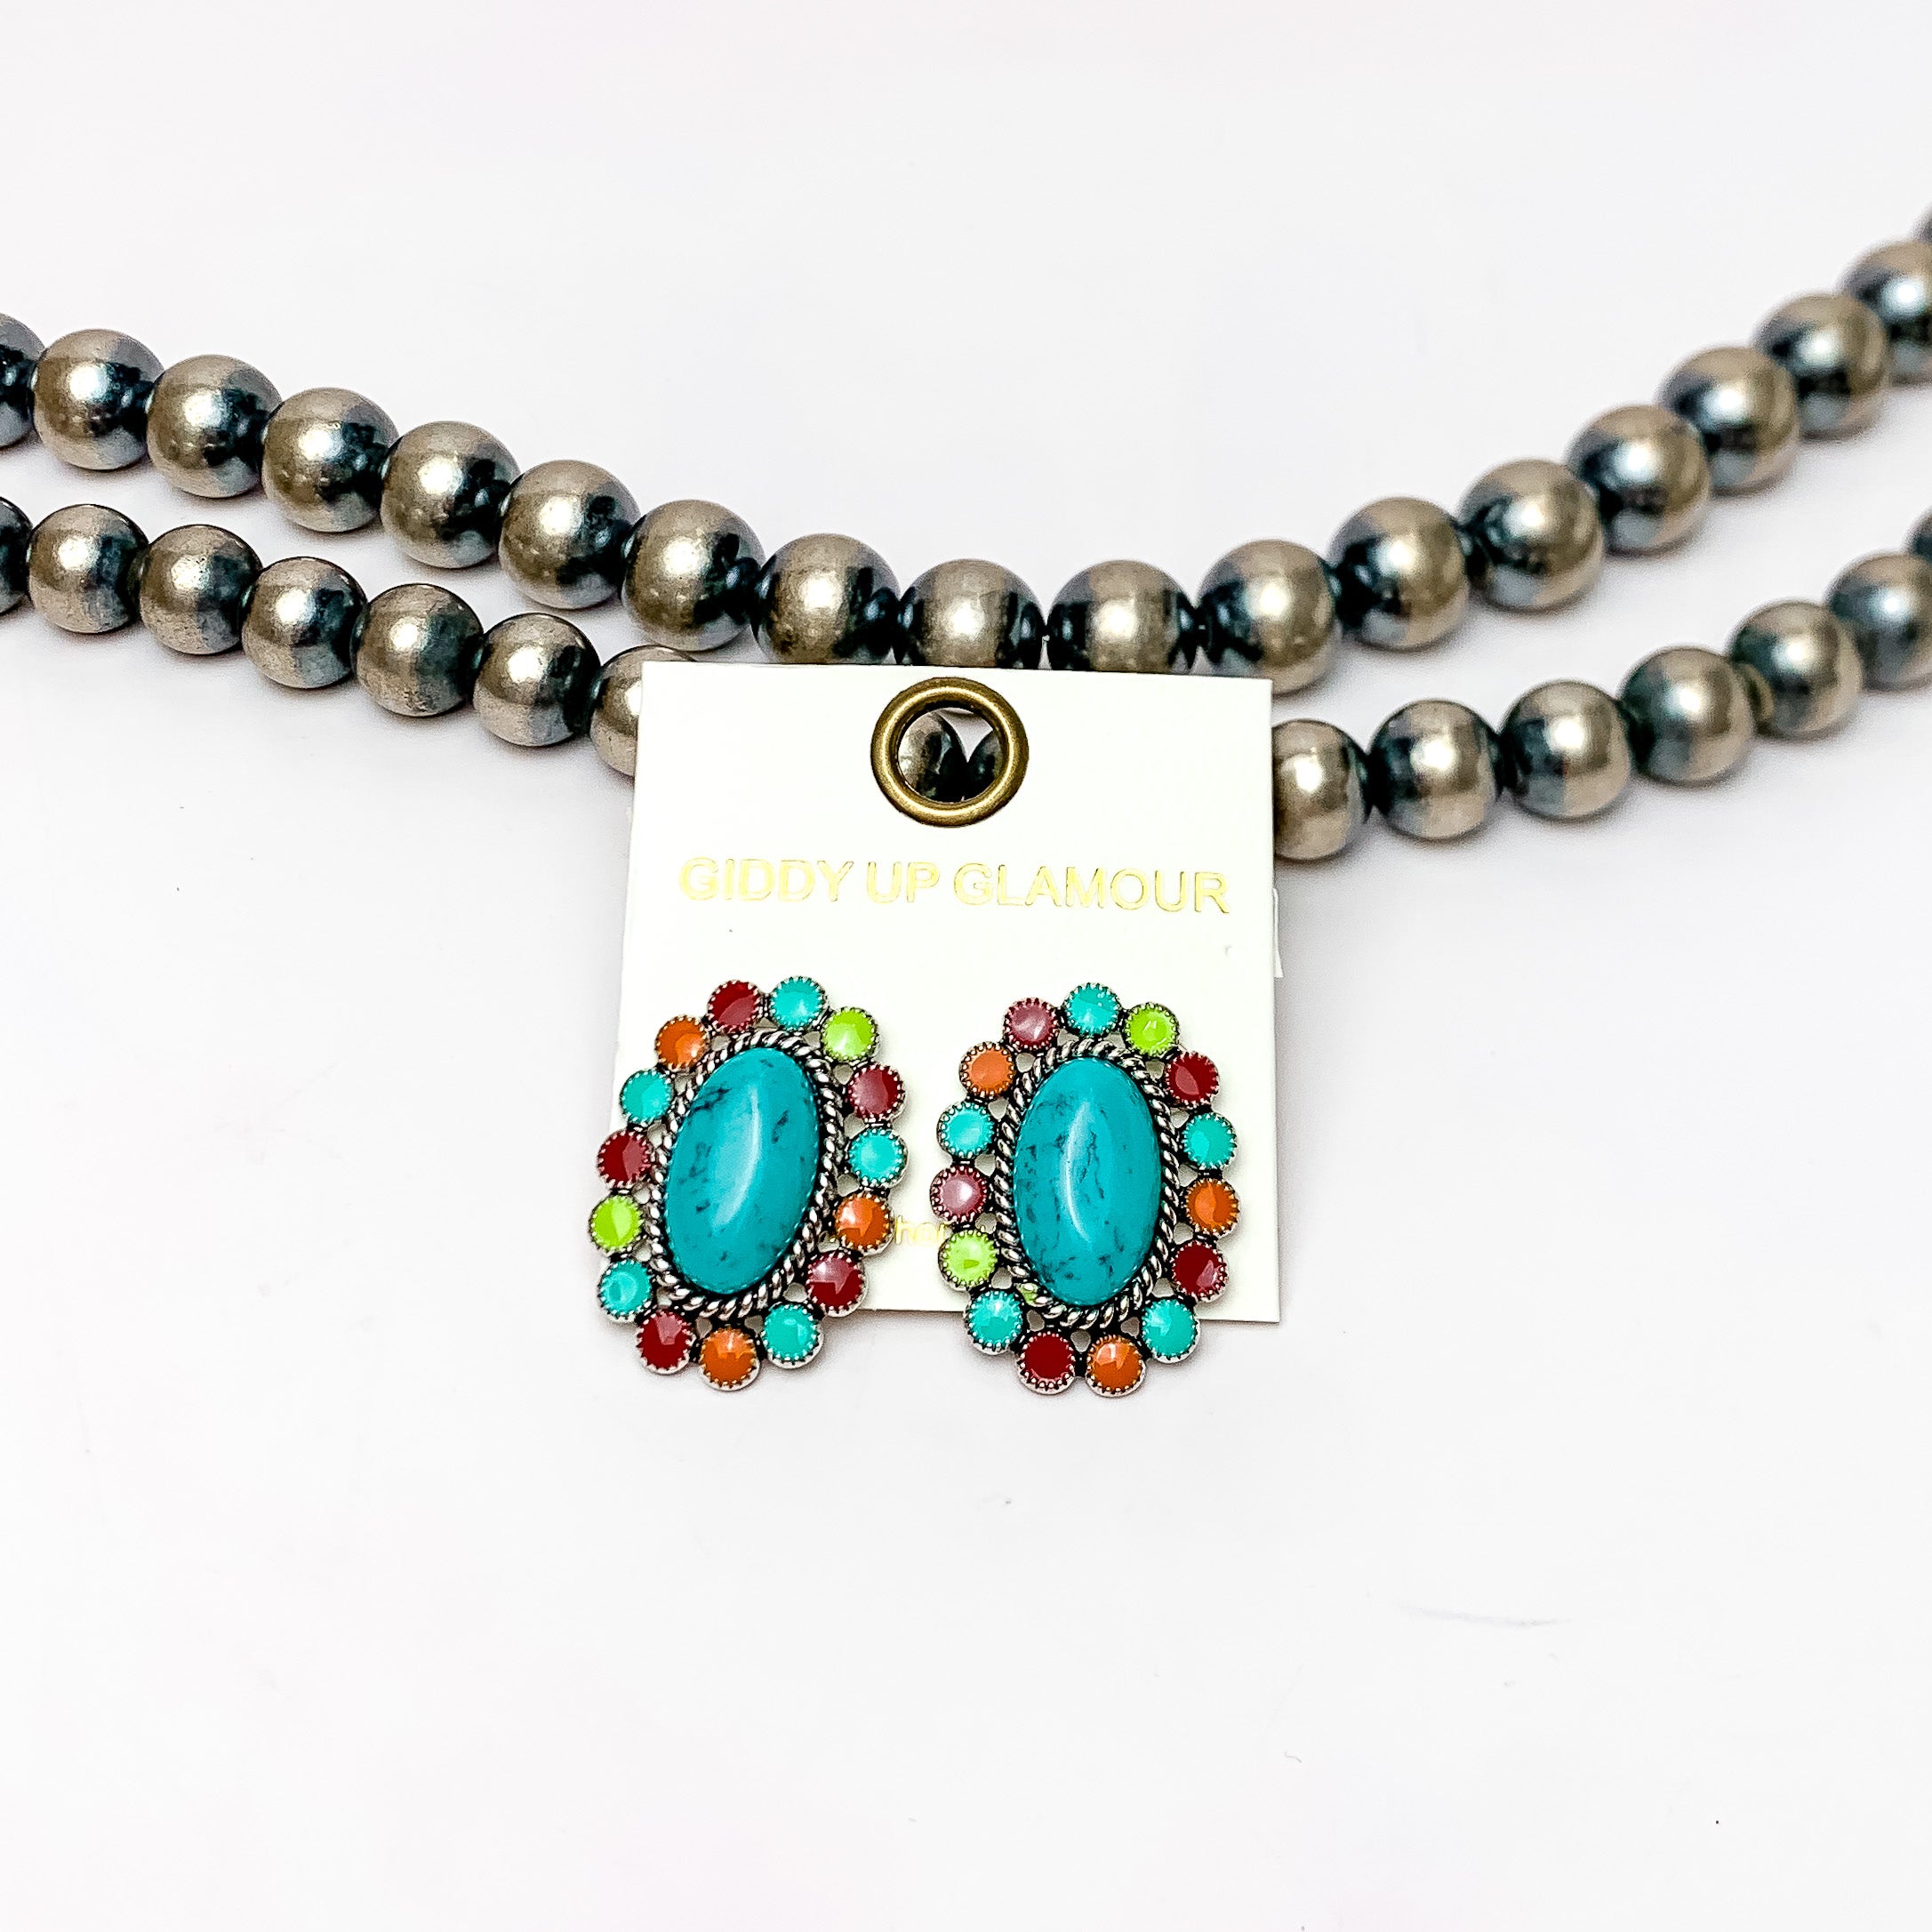 Concho post earrings in multicolor. These earrings are multicolored stones surrounding a bigger turquoise stone. Pictured on a white background with Navajo pearls behind the earrings.